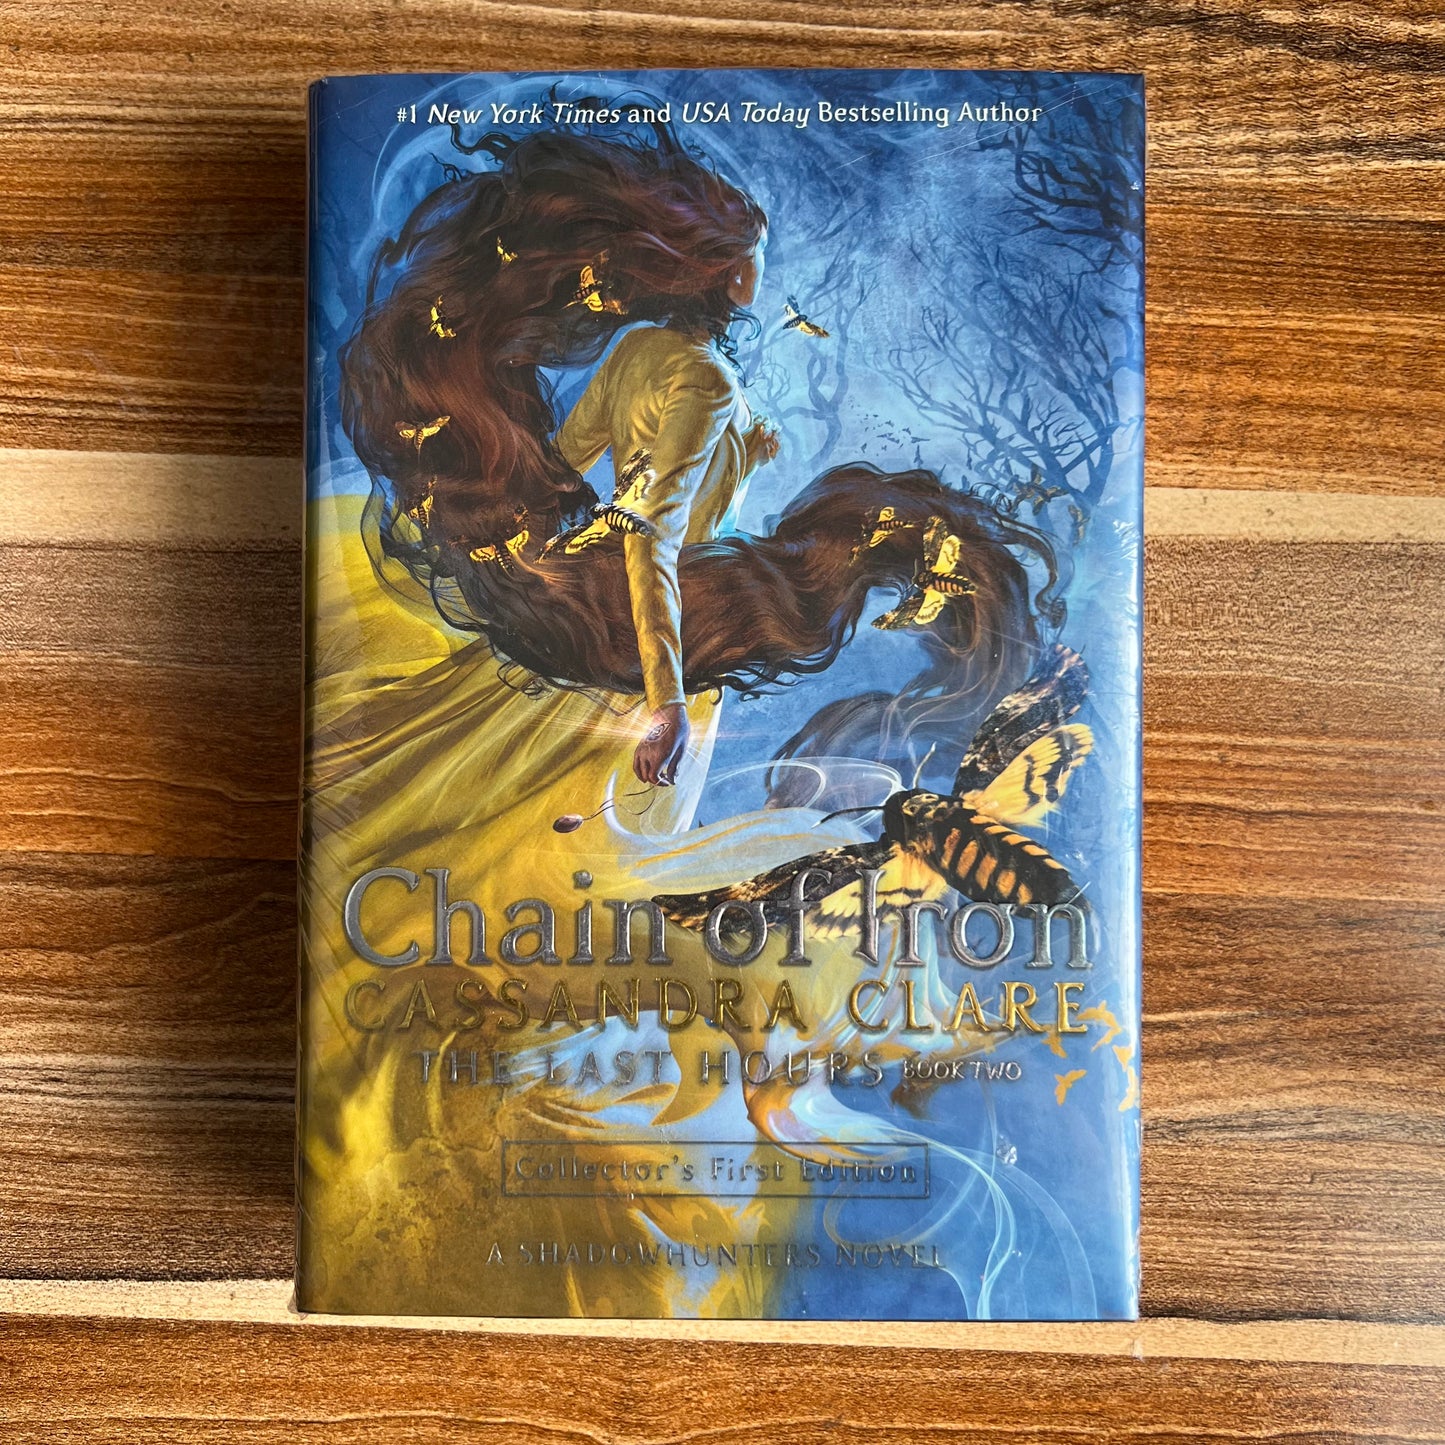 [SALE] Chain Of Iron Collector's First Edition, The Last Hours (Hardcover)